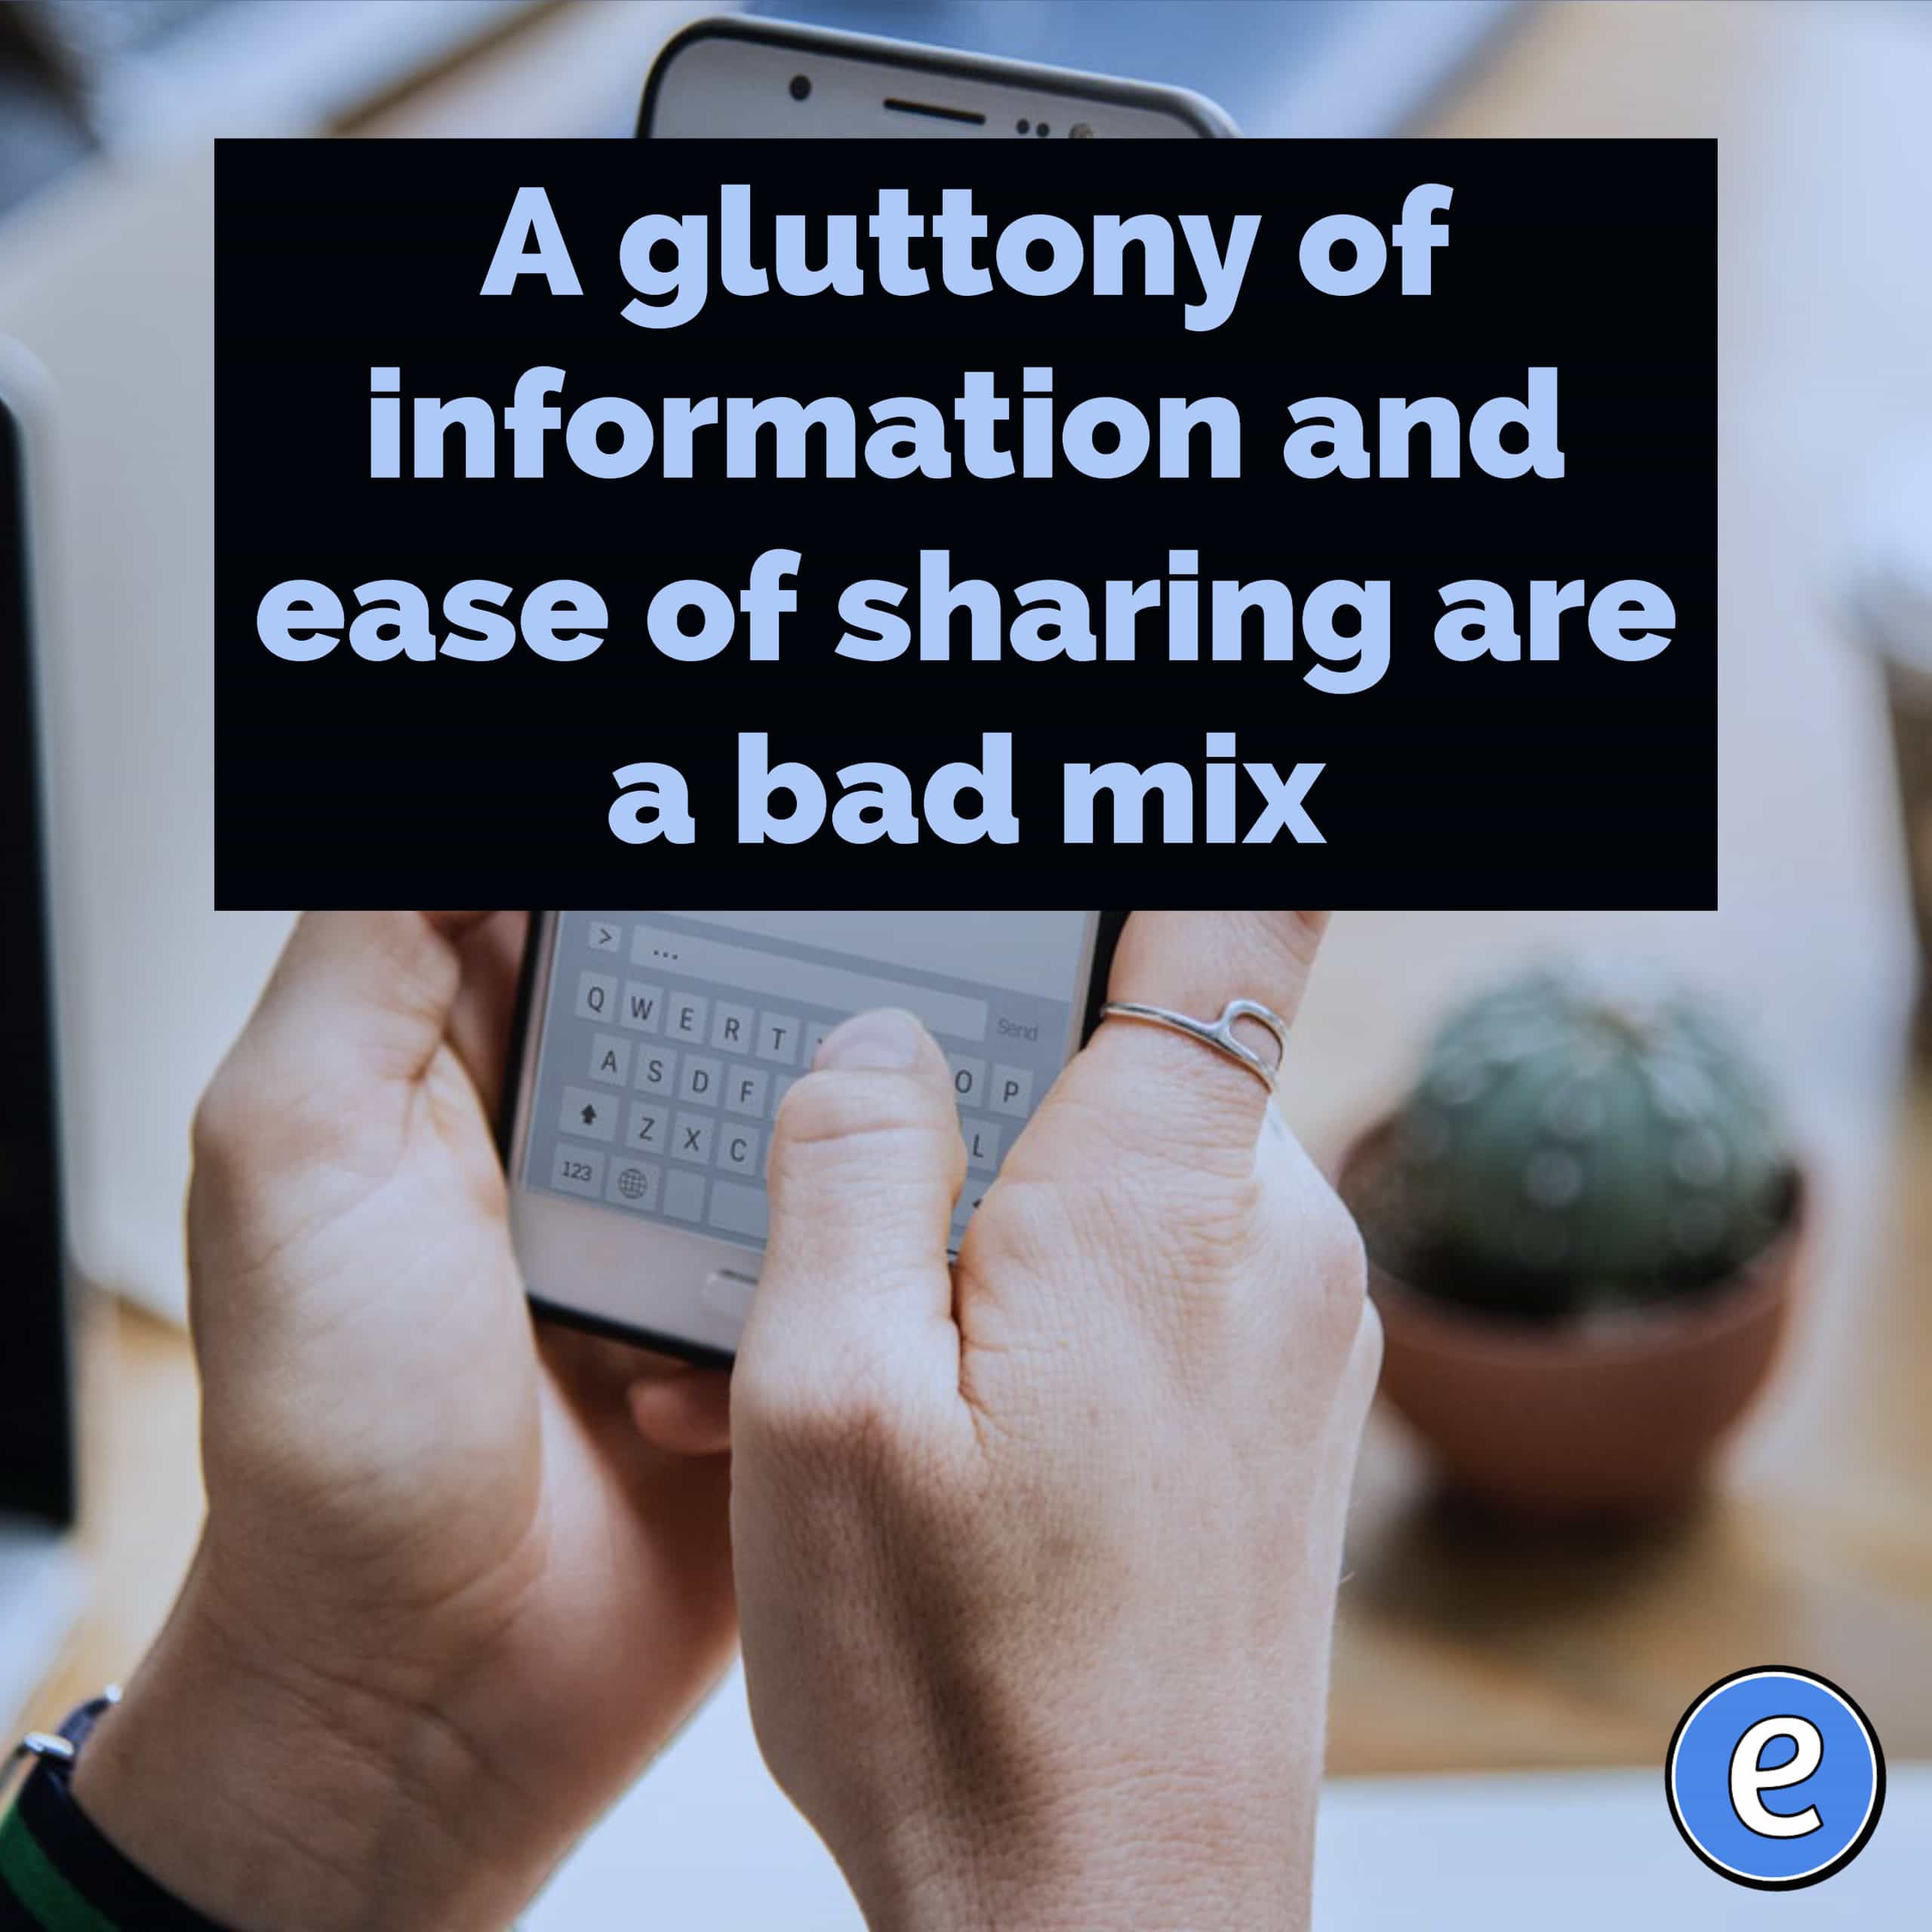 A gluttony of information and ease of sharing are a bad mix